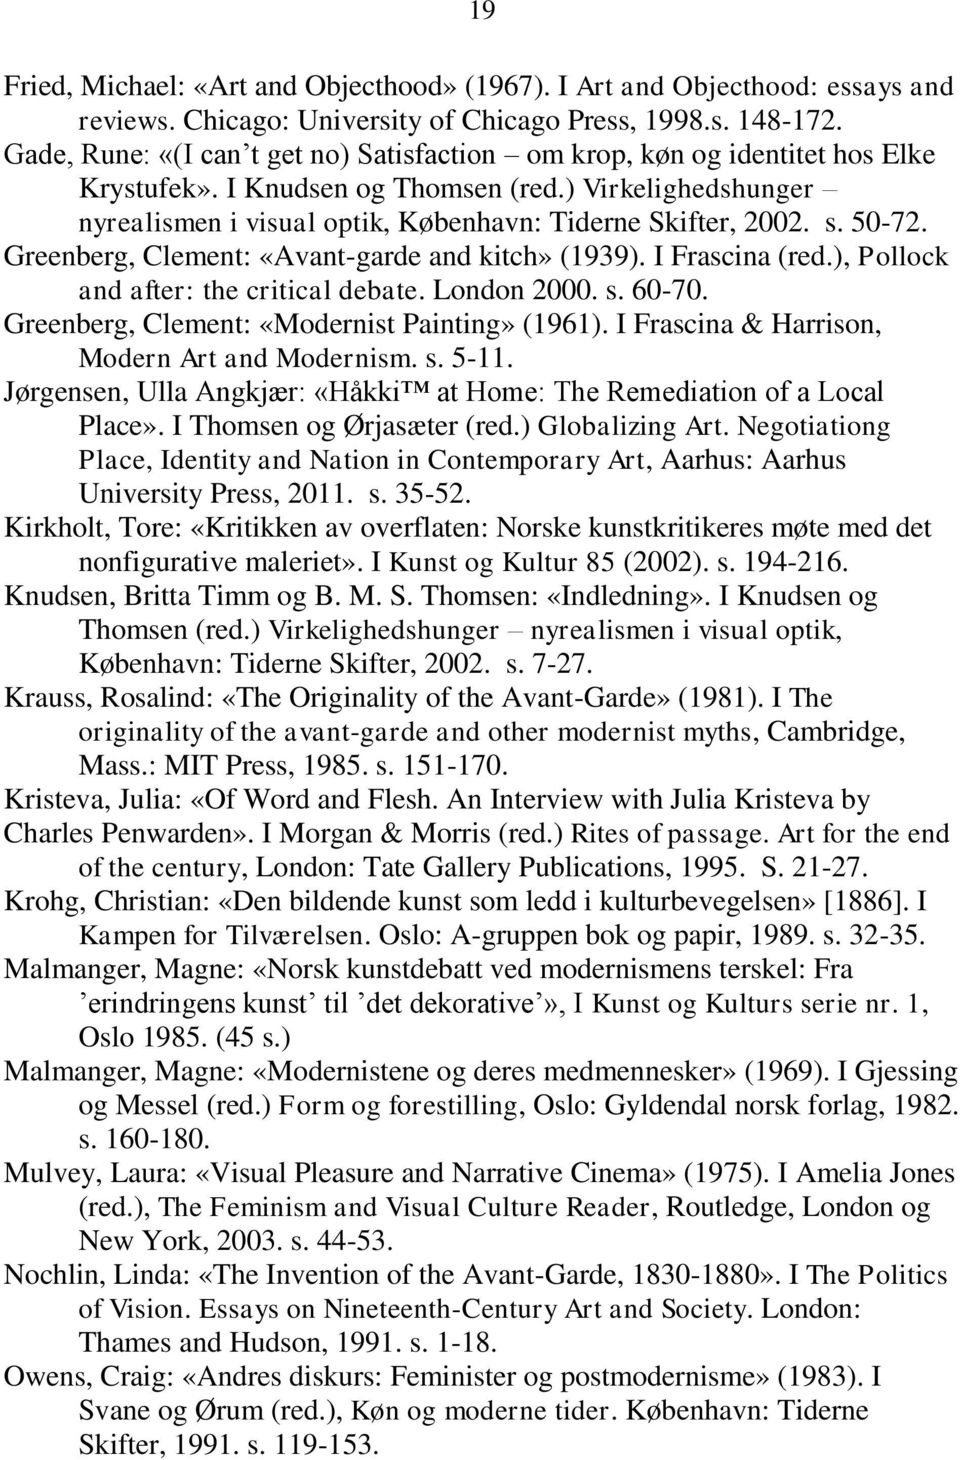 s. 50-72. Greenberg, Clement: «Avant-garde and kitch» (1939). I Frascina (red.), Pollock and after: the critical debate. London 2000. s. 60-70. Greenberg, Clement: «Modernist Painting» (1961).